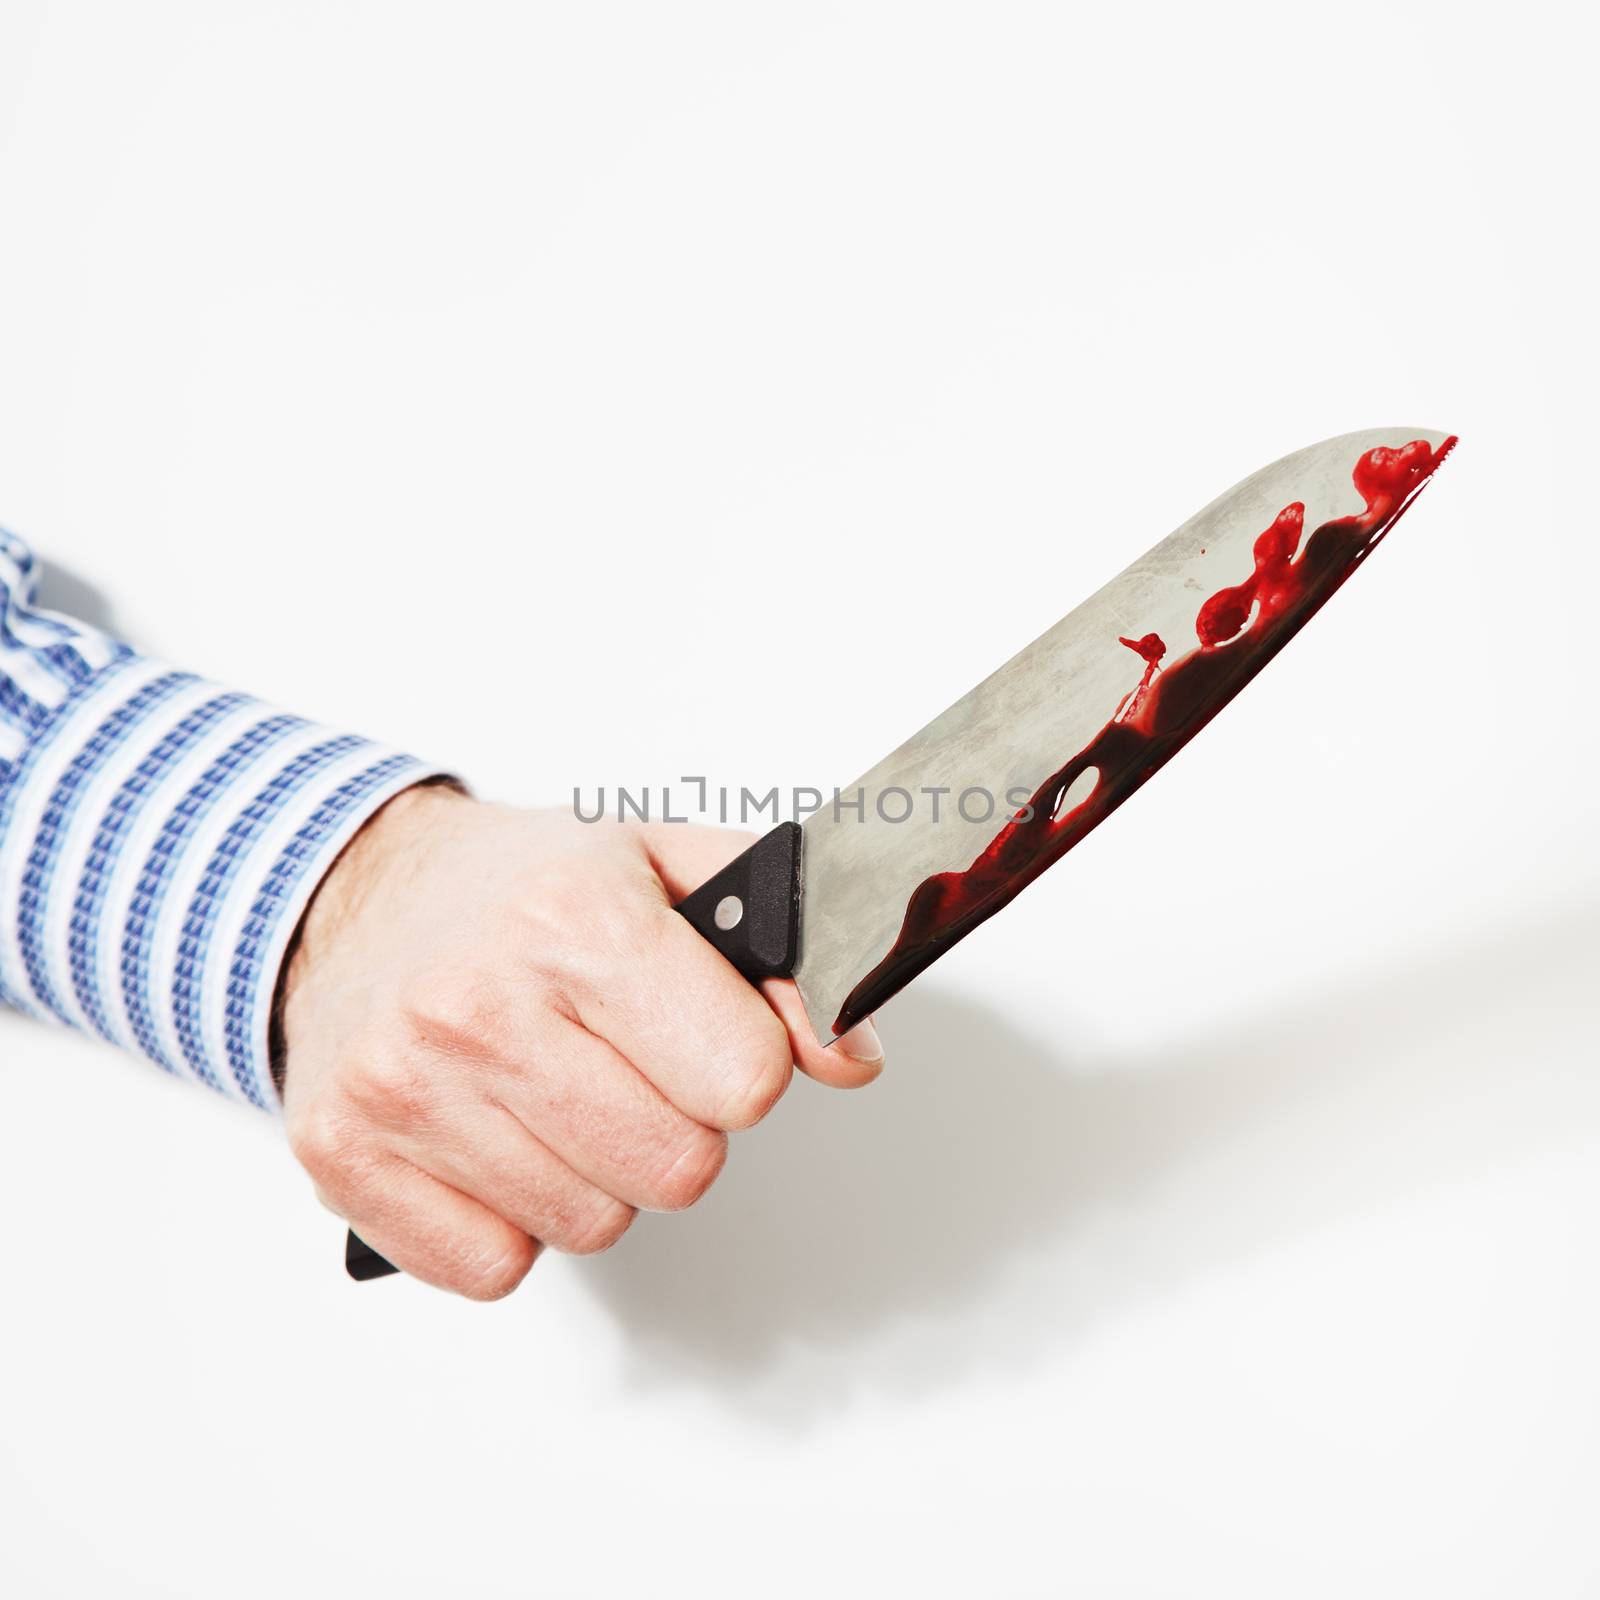 The hand  is holding the knife with blood on a white background.